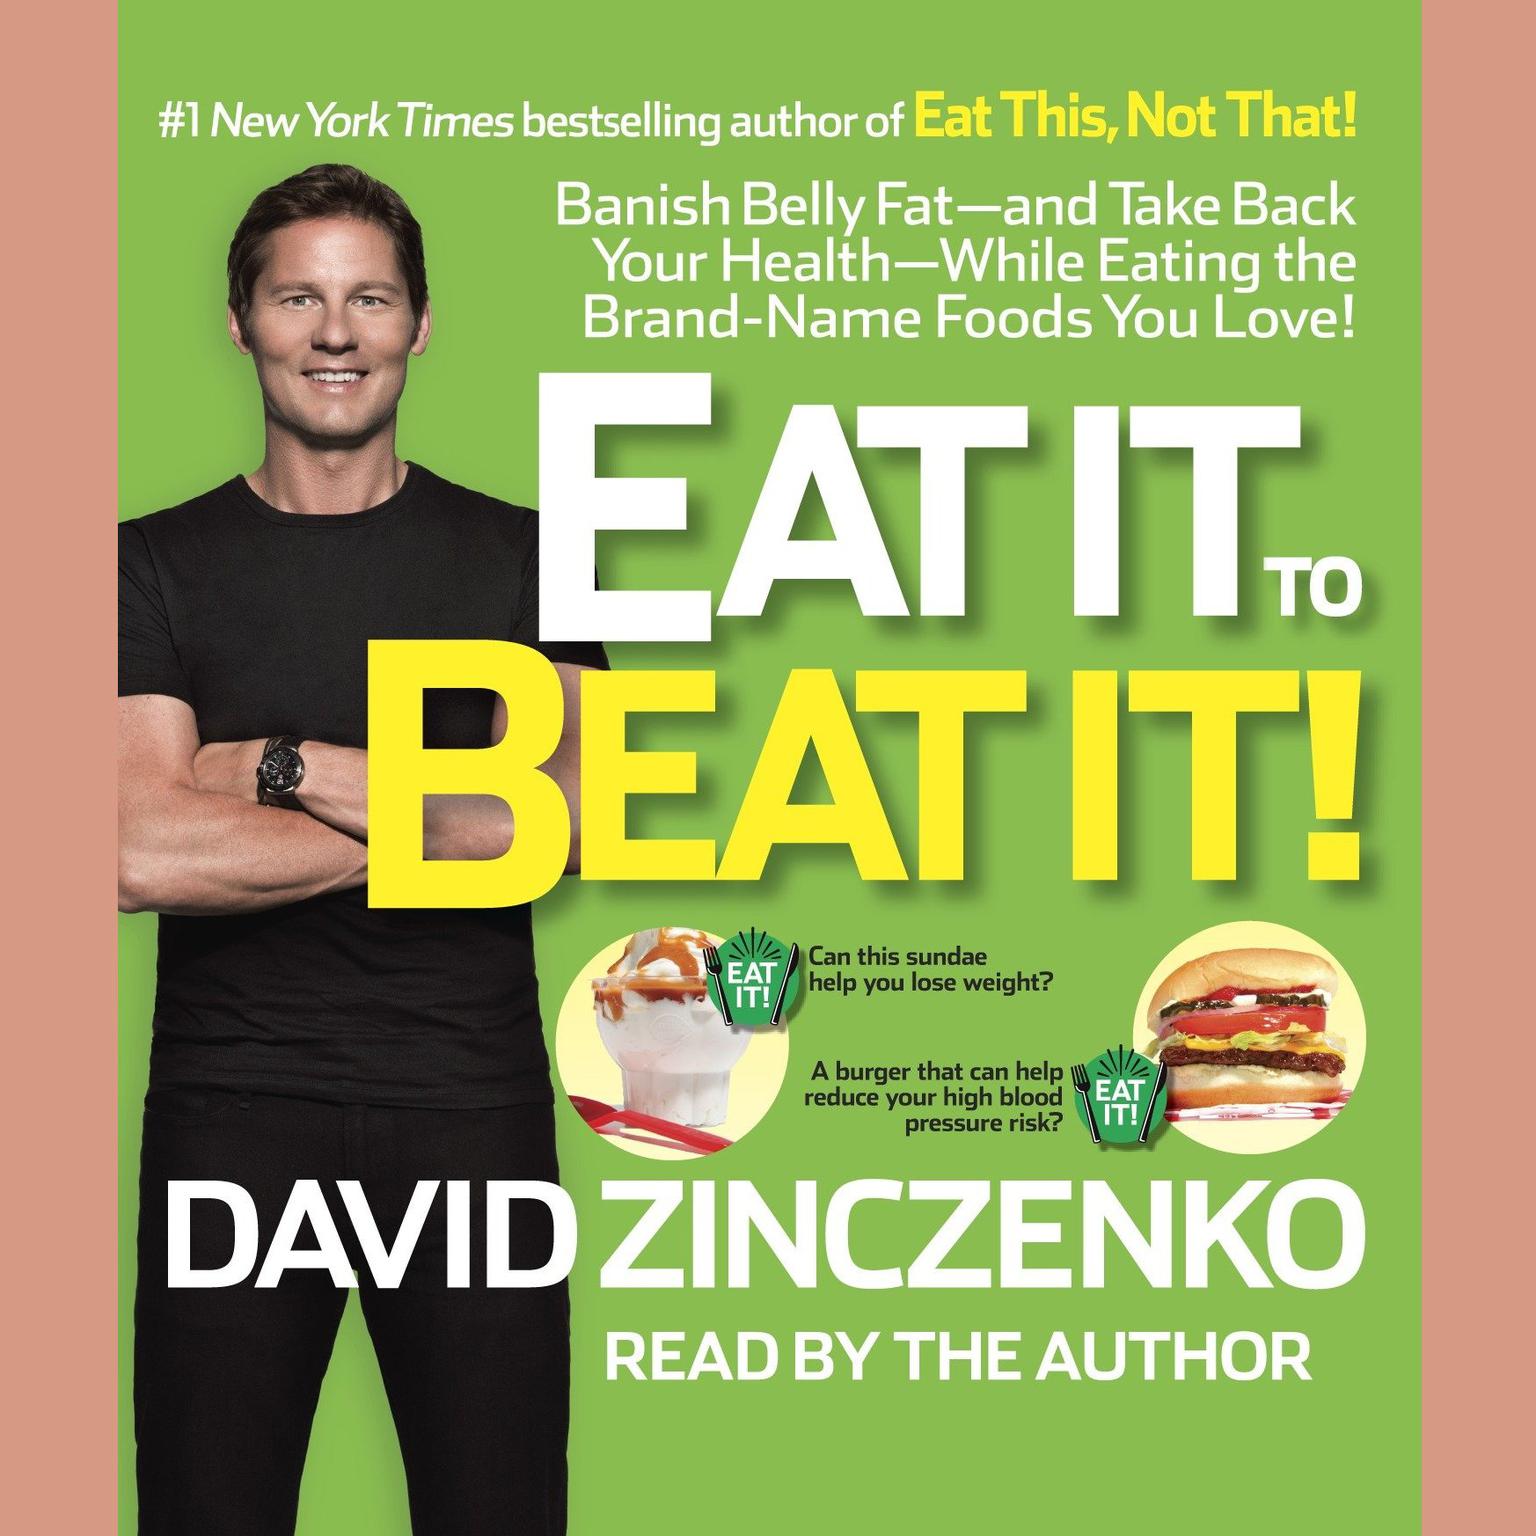 Eat It to Beat It! (Abridged): Banish Belly Fat-and Take Back Your Health-While Eating the Brand-Name Foods You Love! Audiobook, by David Zinczenko